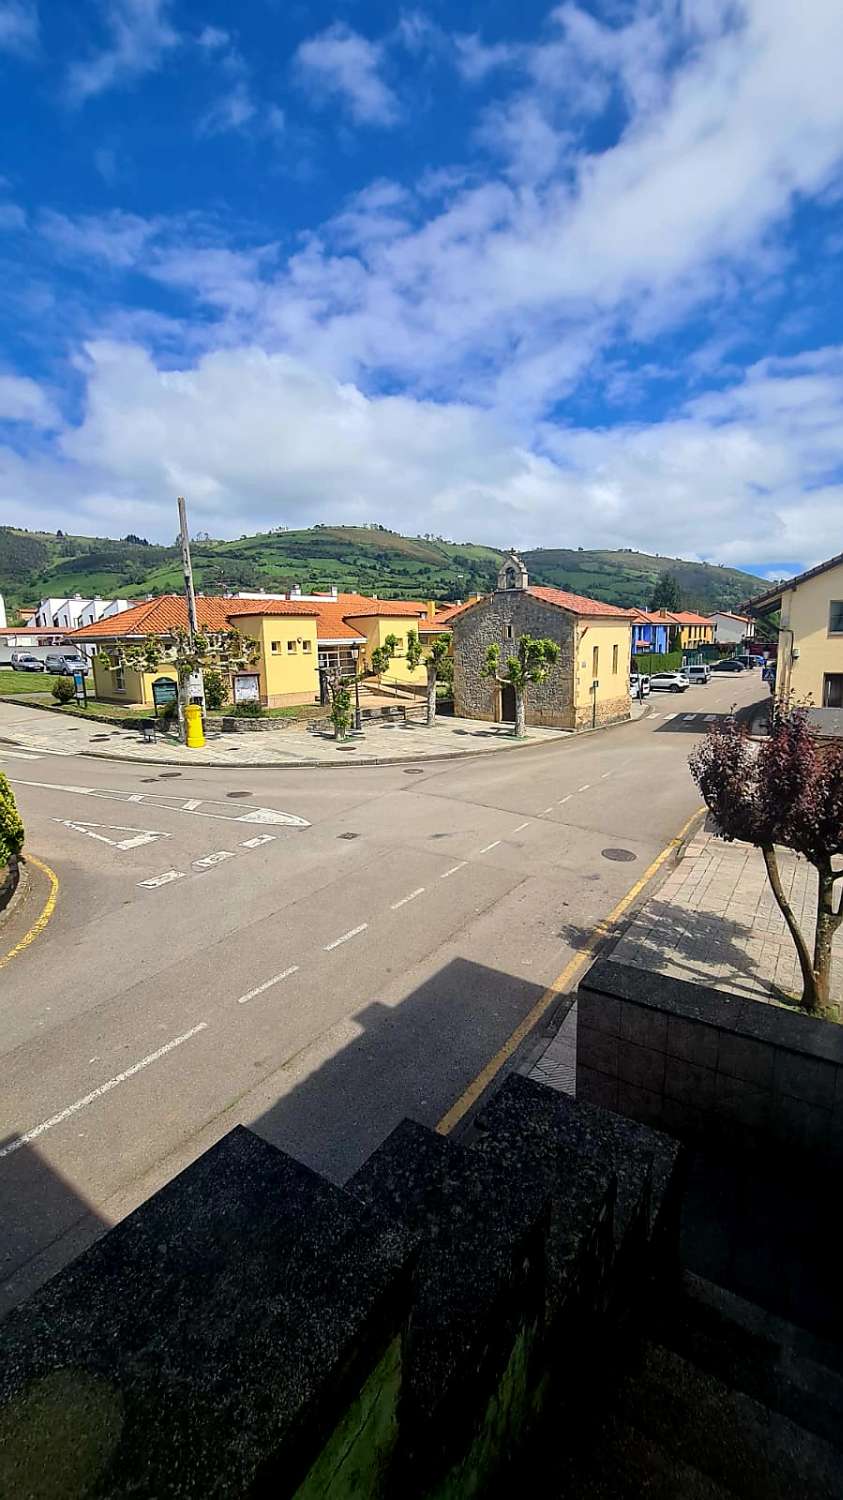 Large Commercial for sale in Vega de Sariego